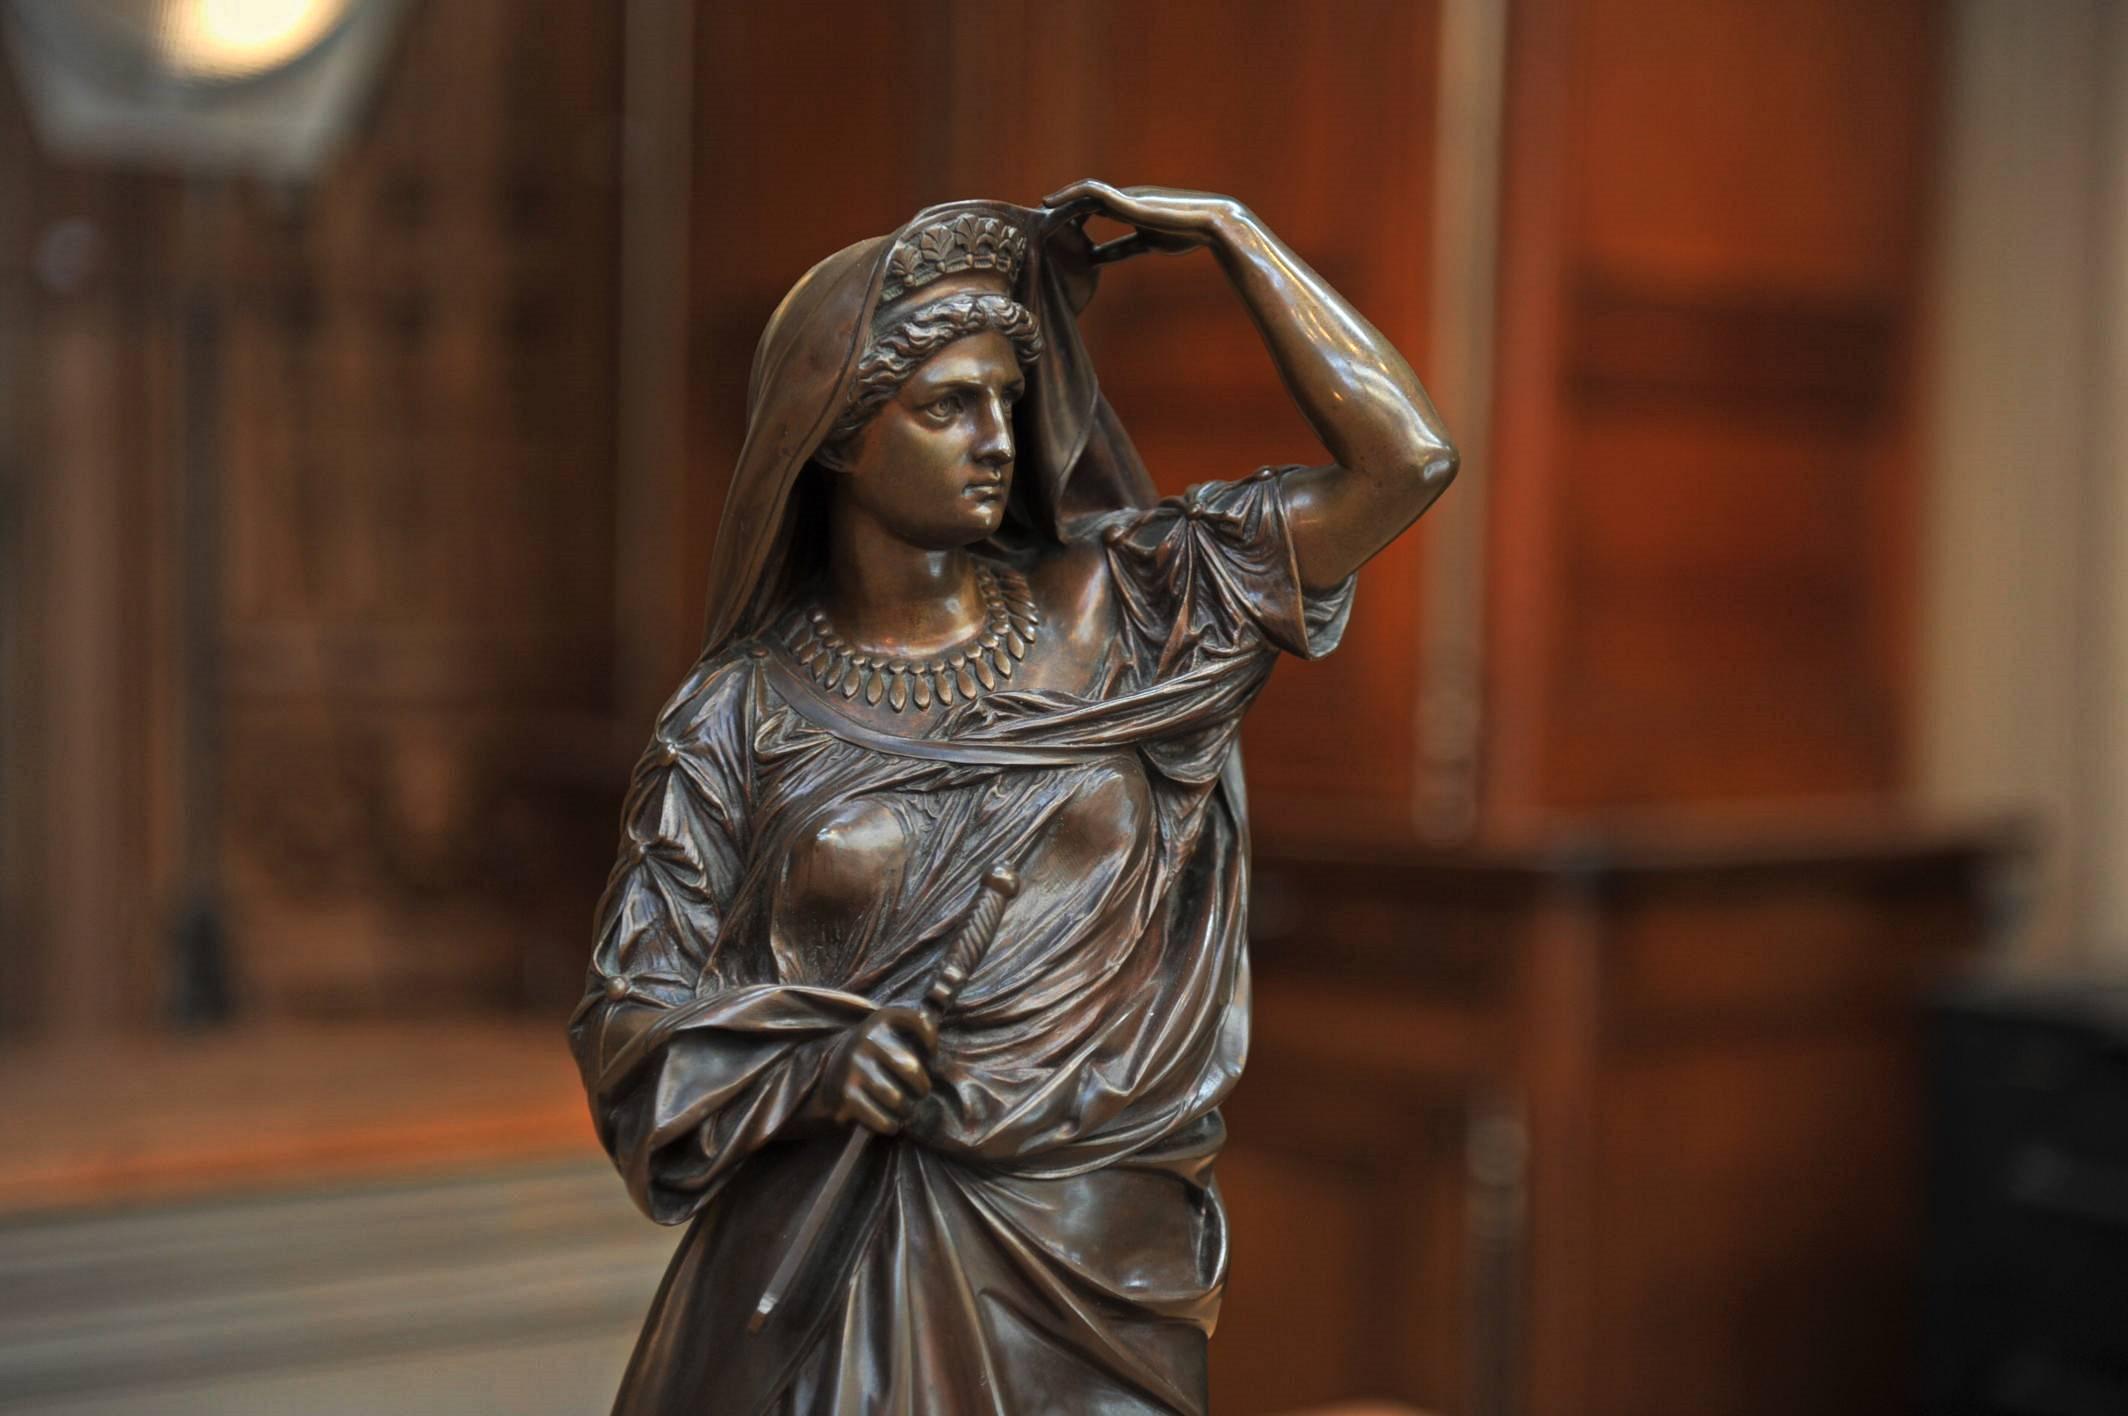 Original 19th century lady statue by Albert-Ernest Carrier-Belleuse (French, 1824-1887). Original marble base. Cast in bronze in France, this is an exquisitely detailed work of art.
It is signed 